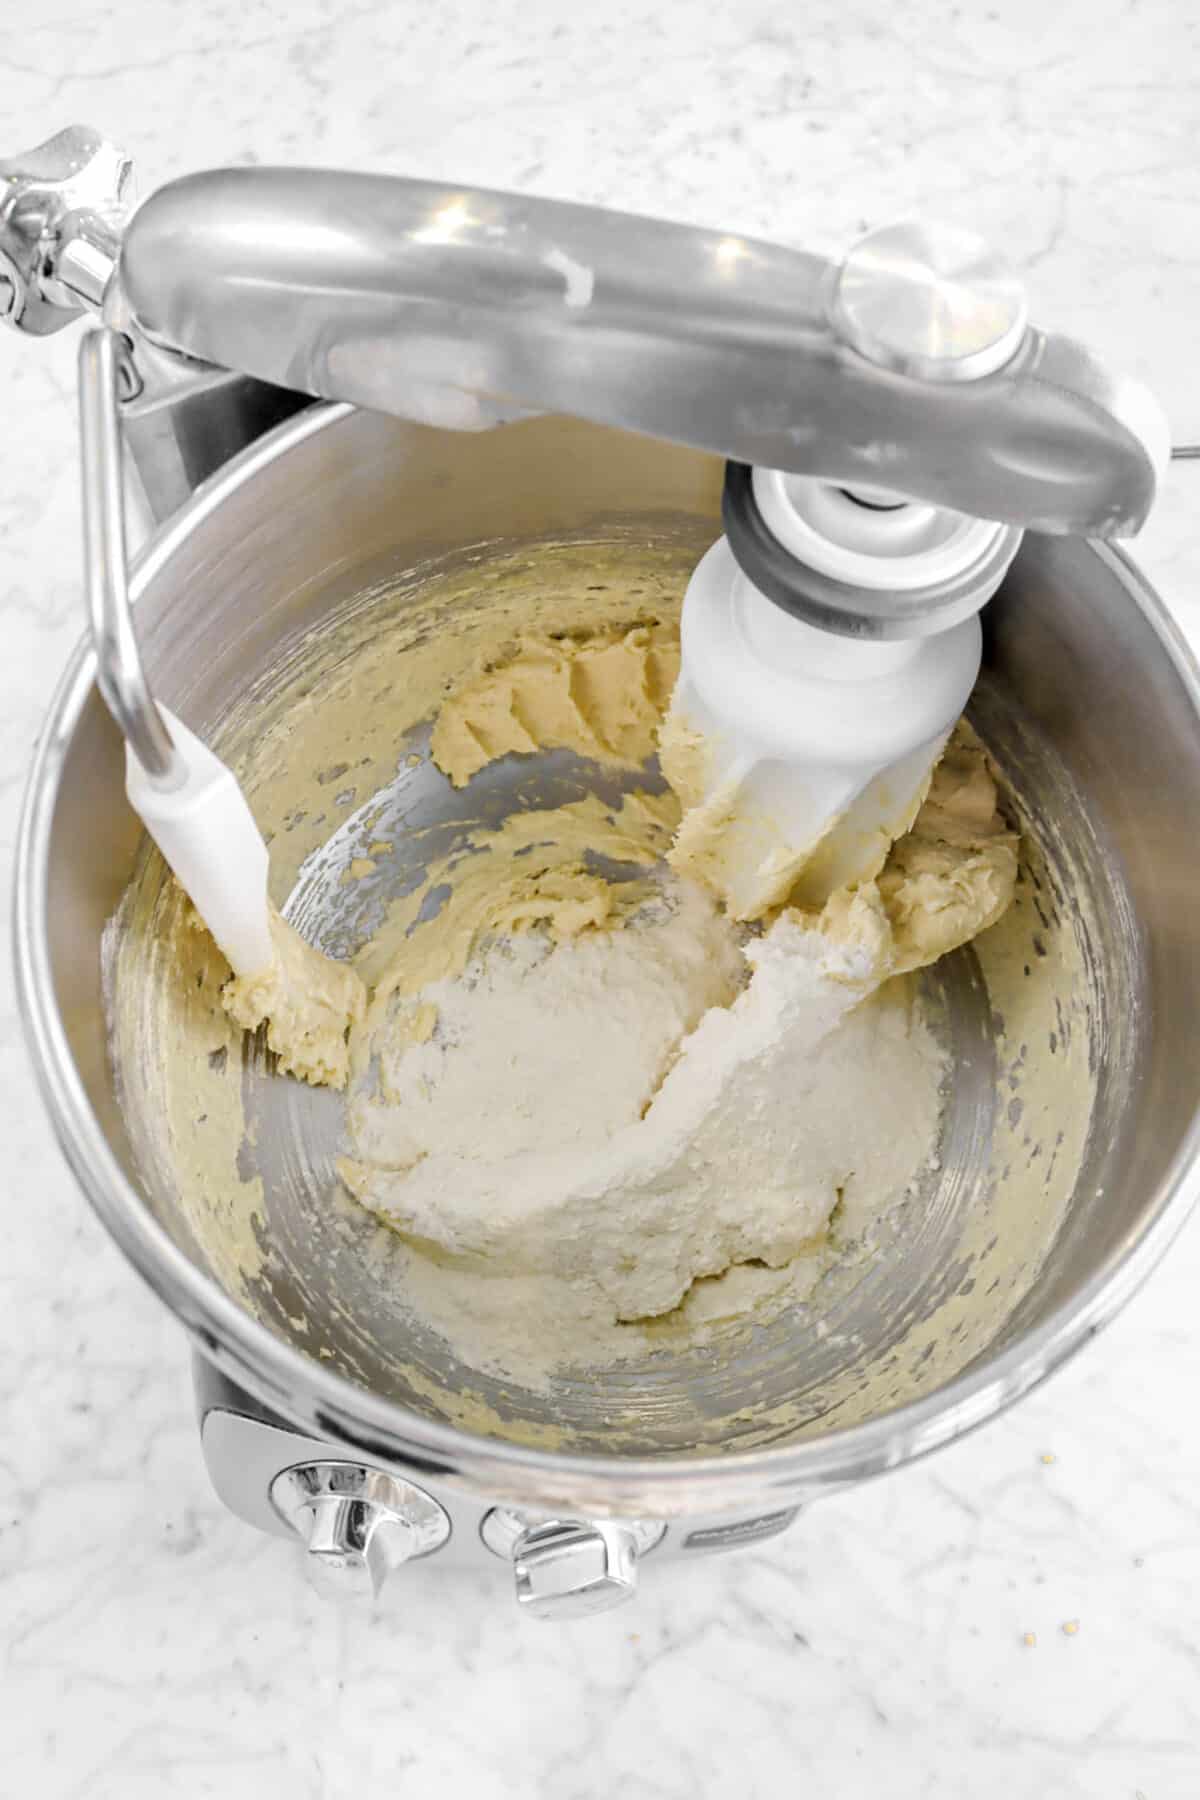 dry ingredients added to butter mixture